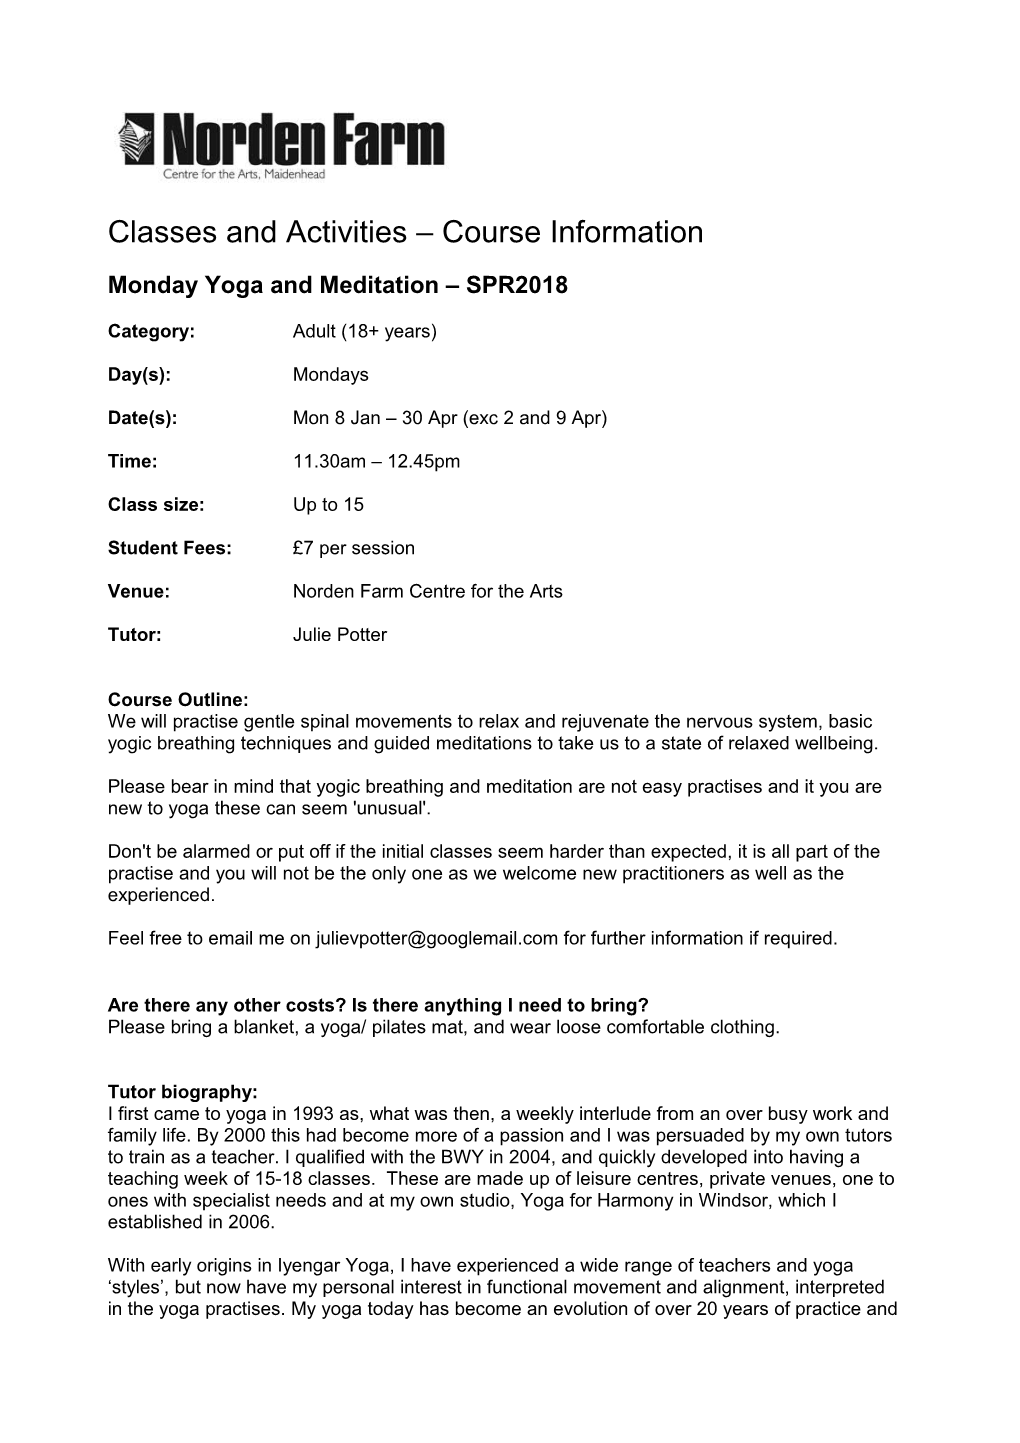 Classes and Activities Course Information